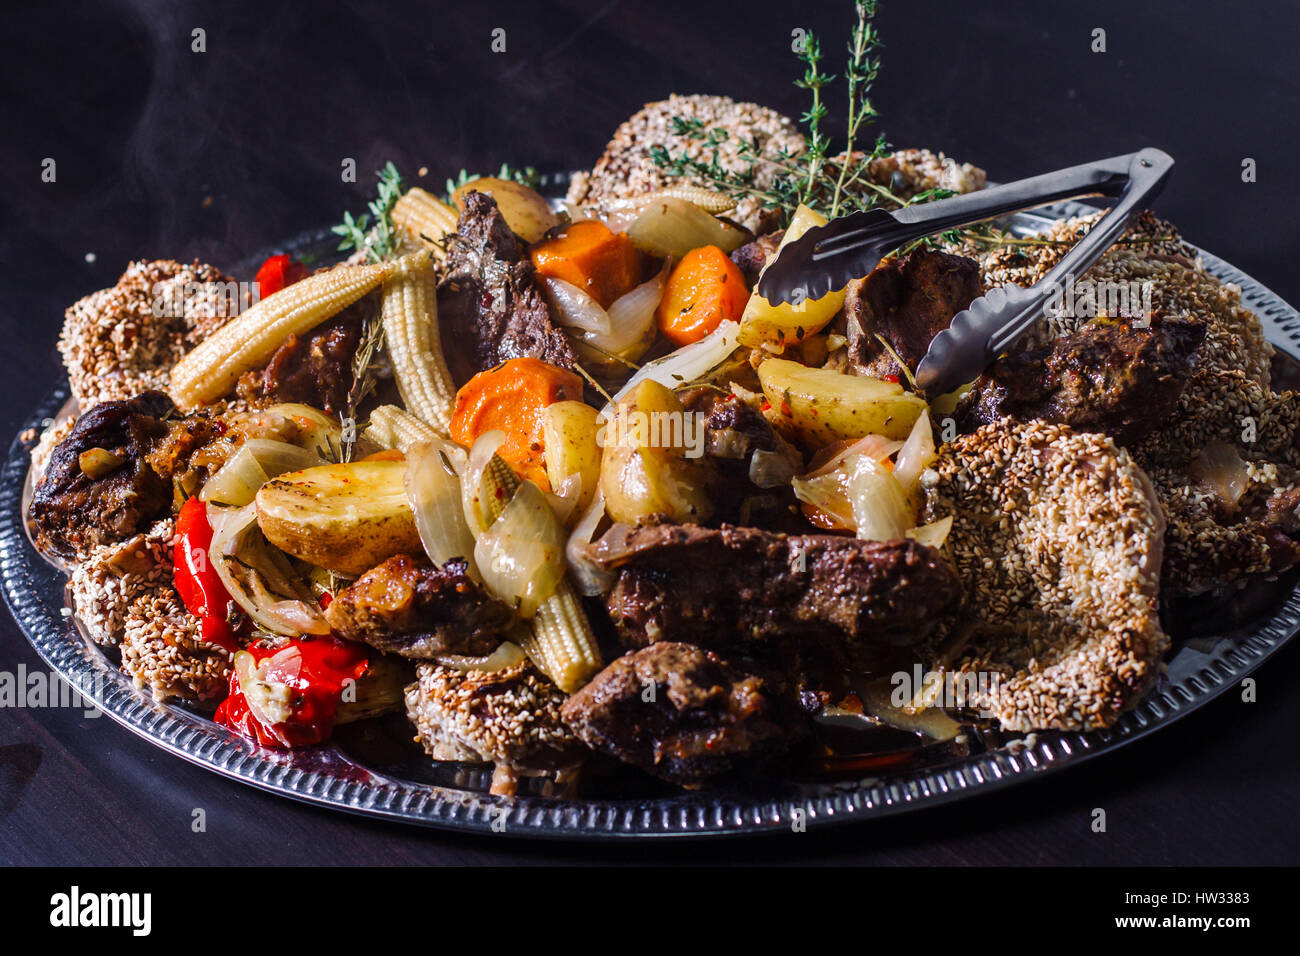 Grilled meat with boiled potatoes and vegetables Stock Photo